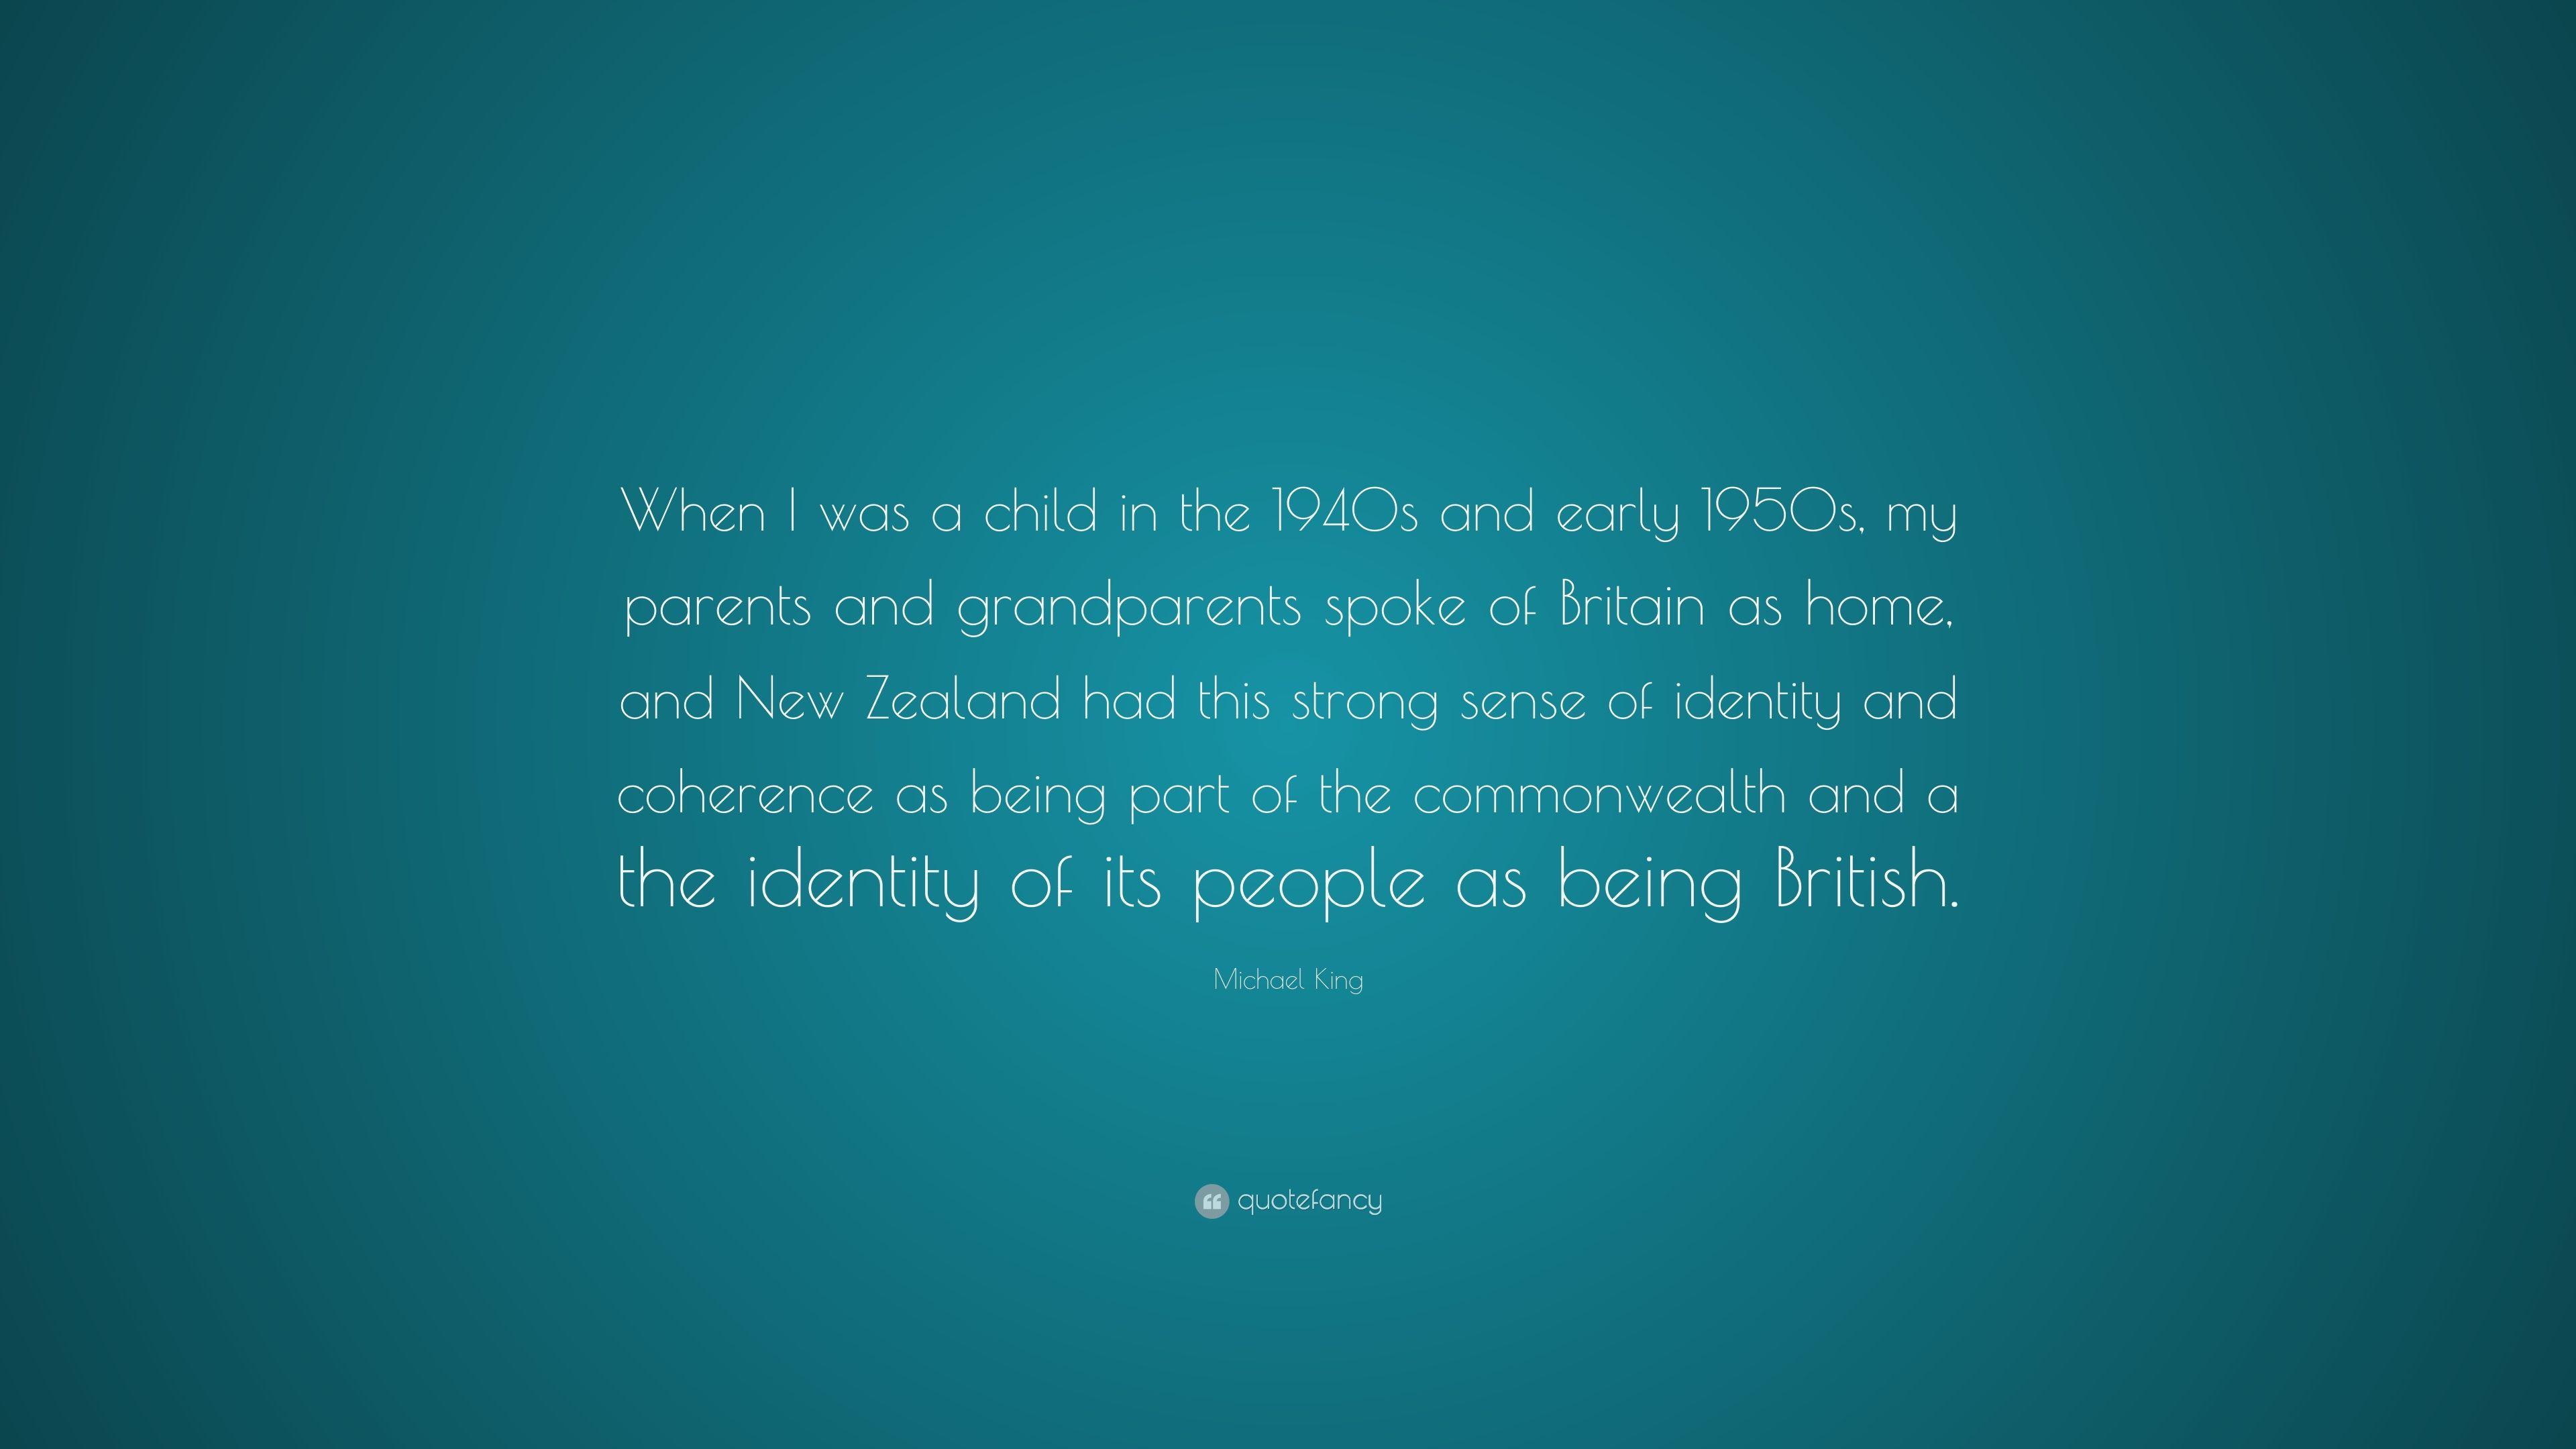 Michael King Quote: “When I was a child in the 1940s and early 1950s